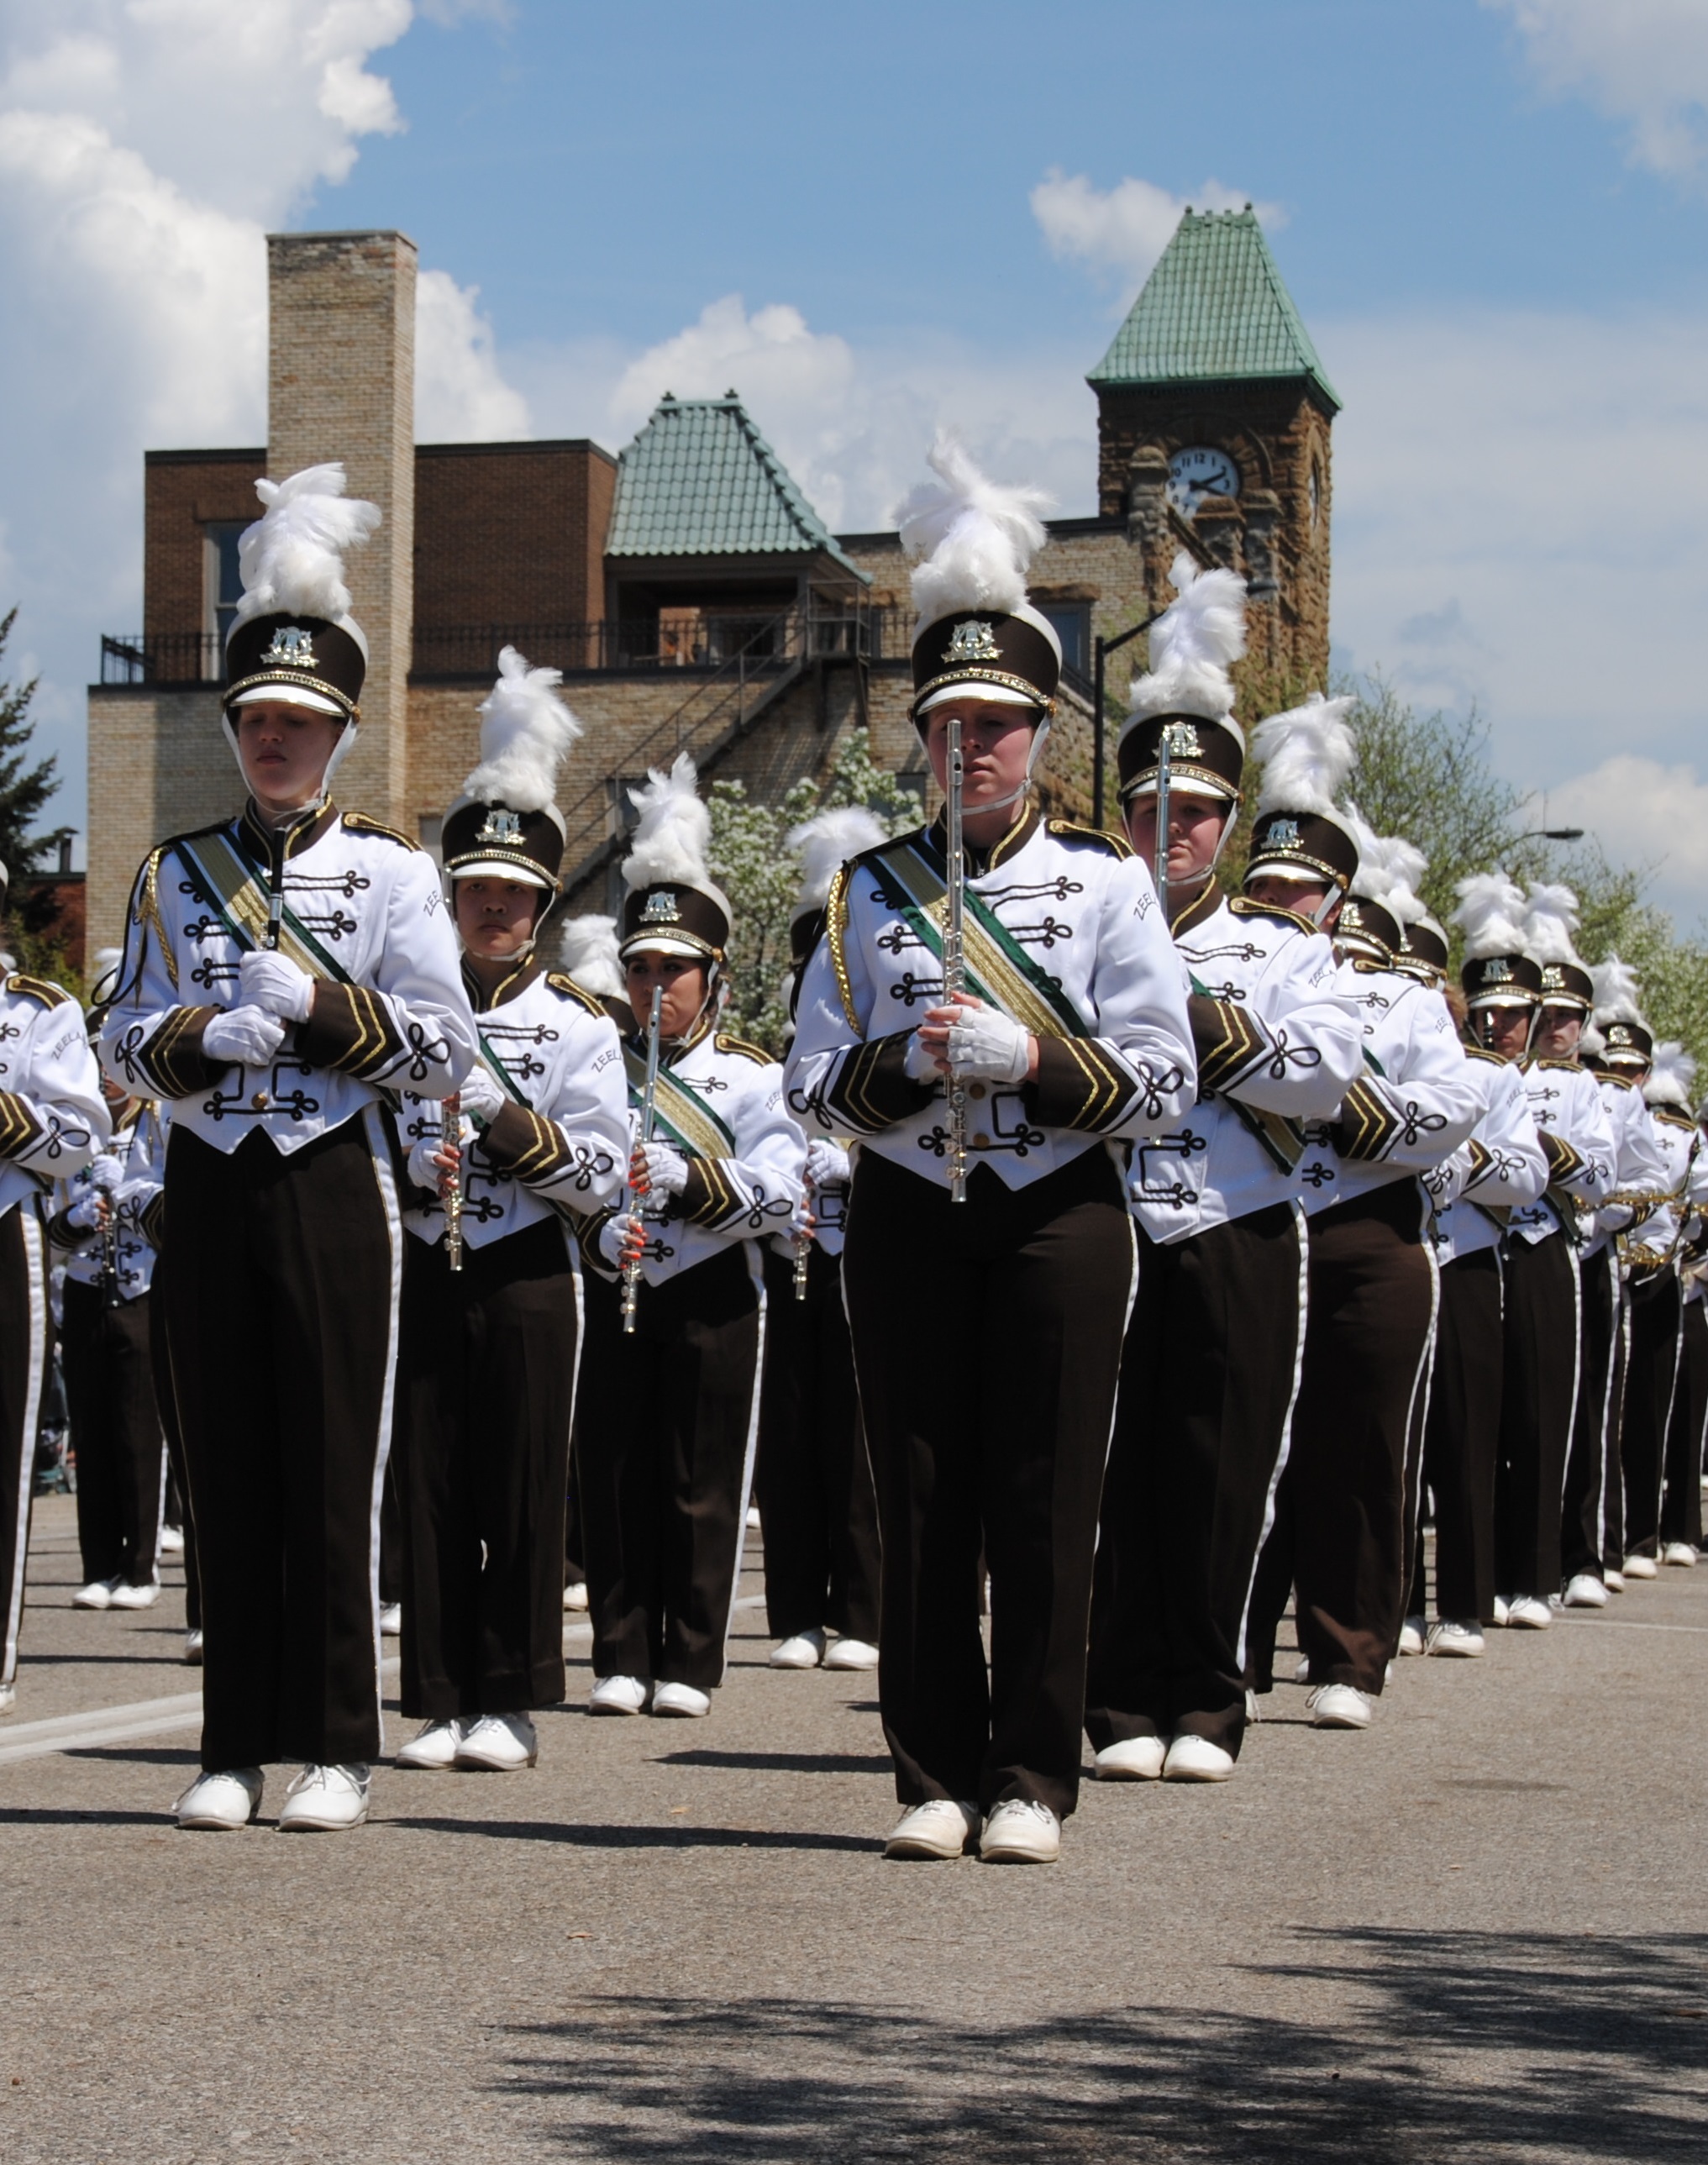 High schoool band members marching in a parade